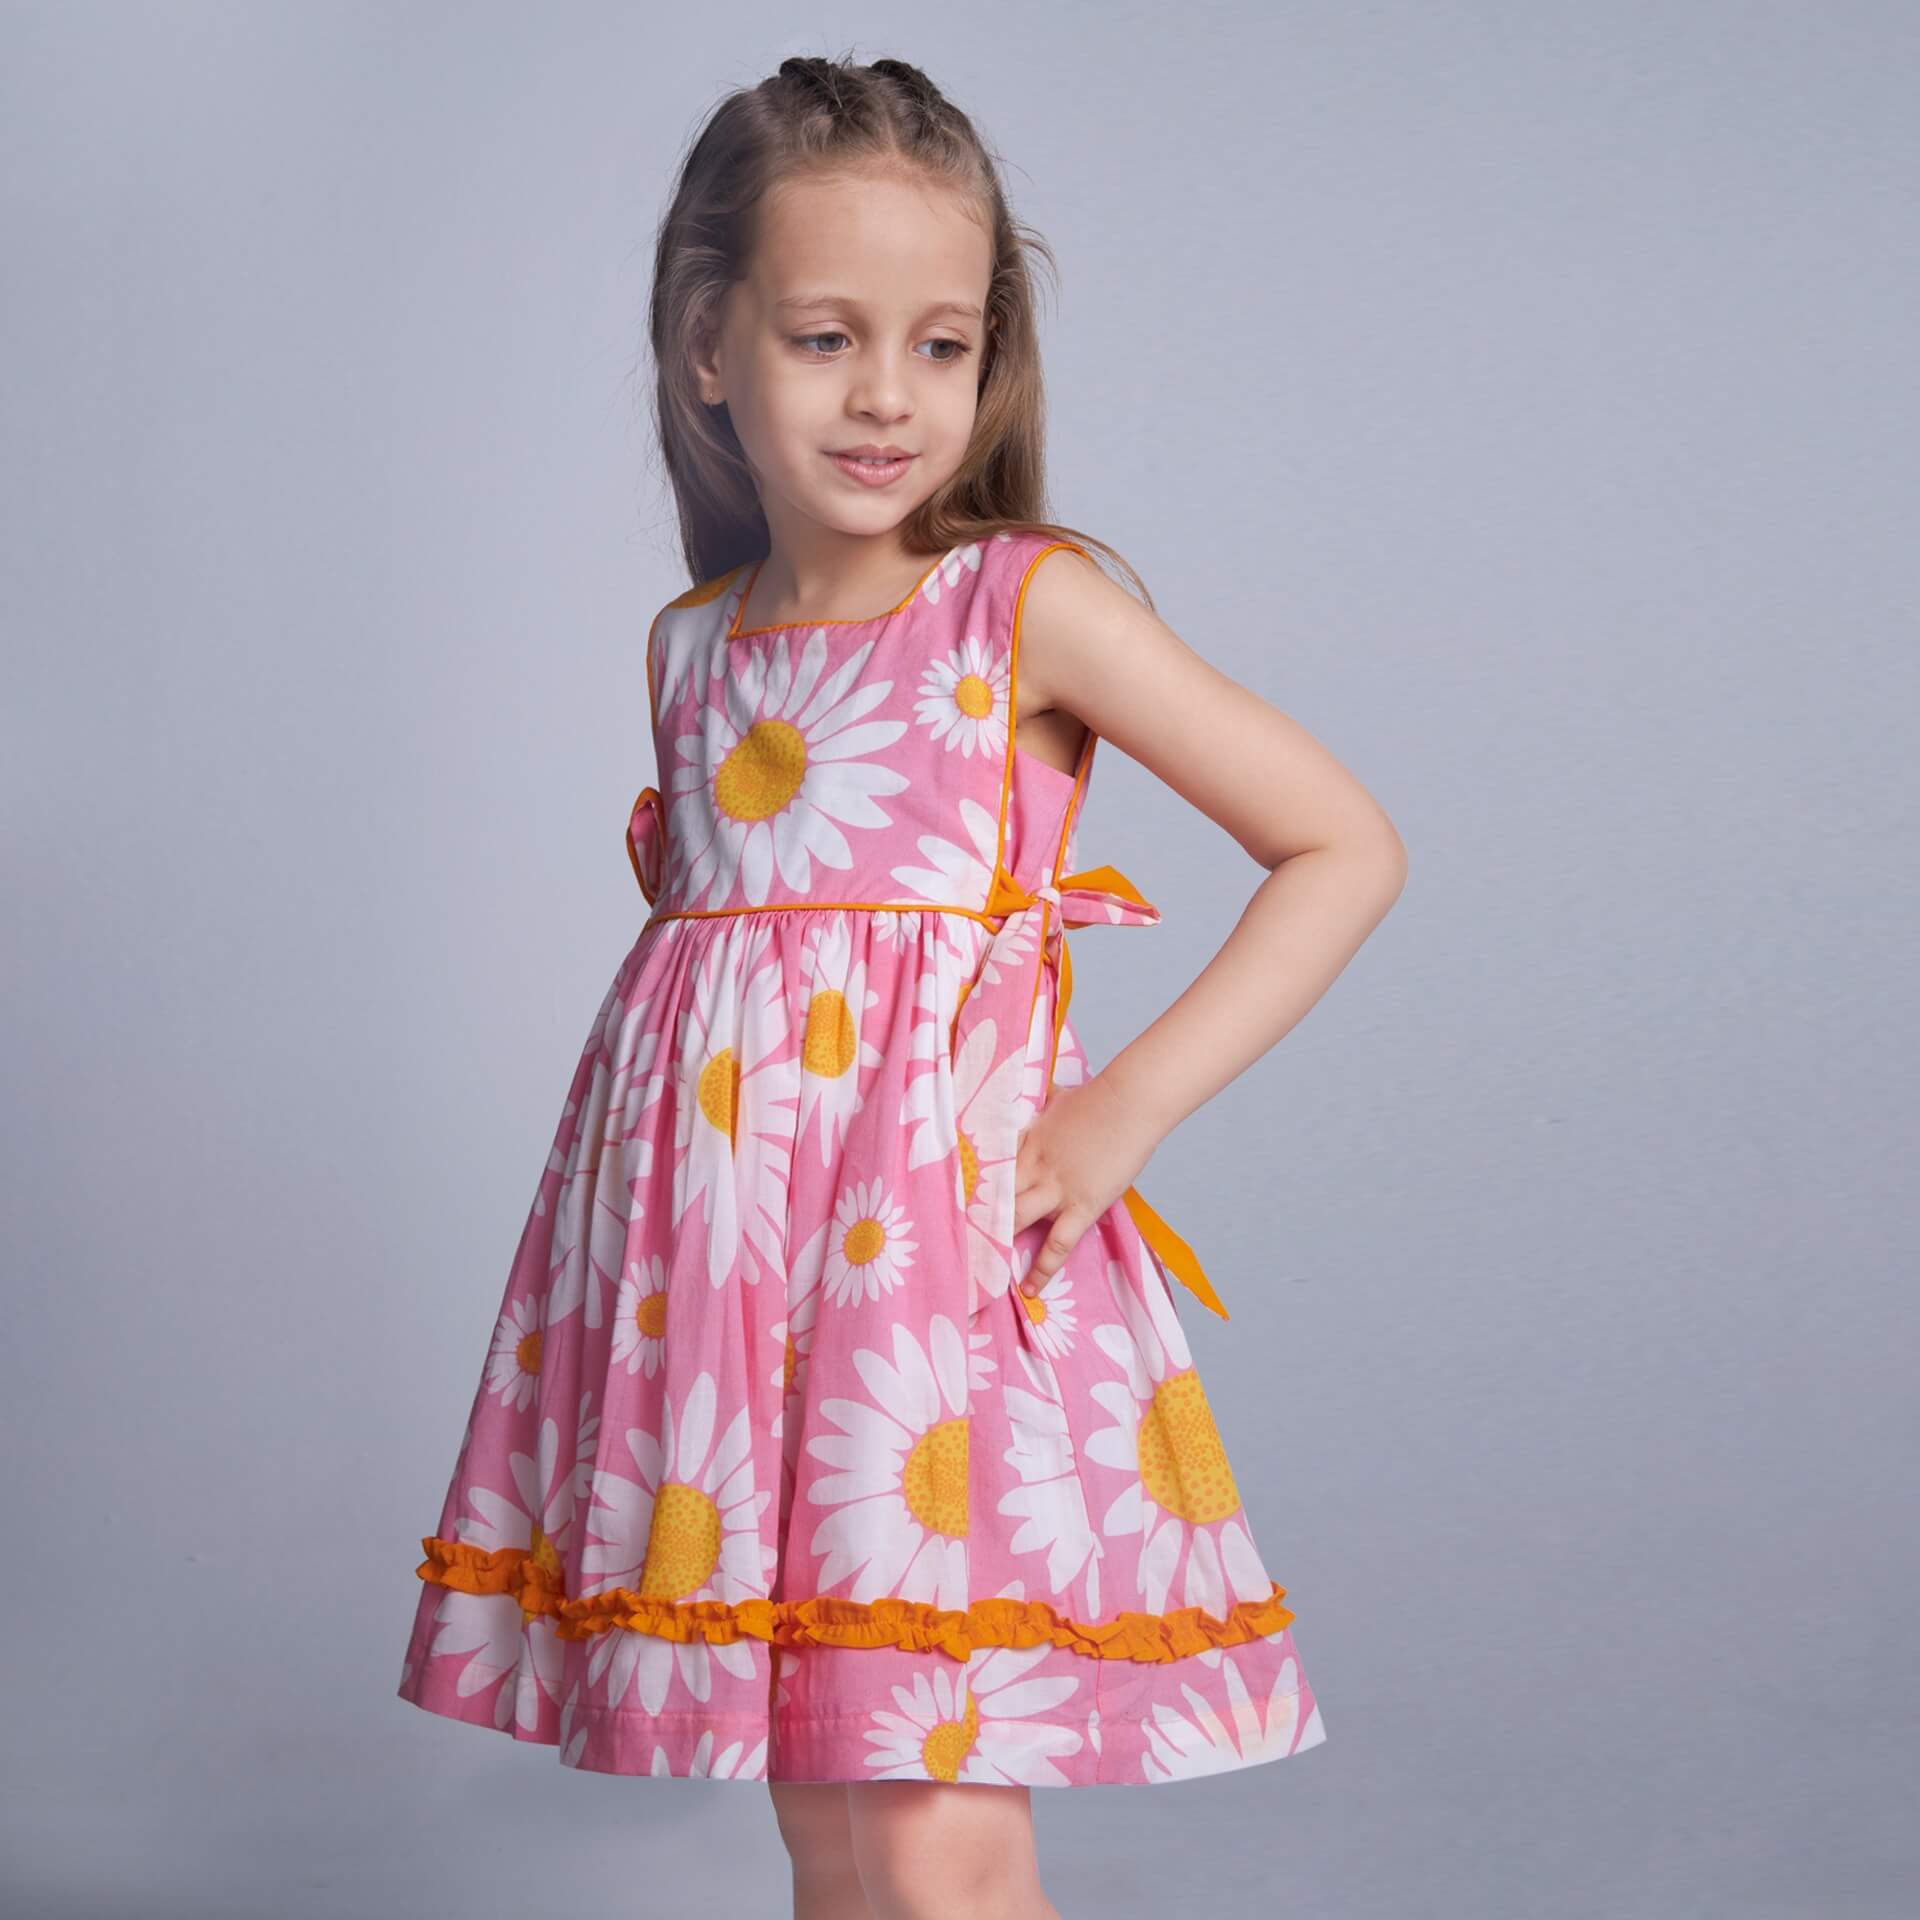 Posing from the side, a little one wears a pink floral dress with side ties in a contrasting tone